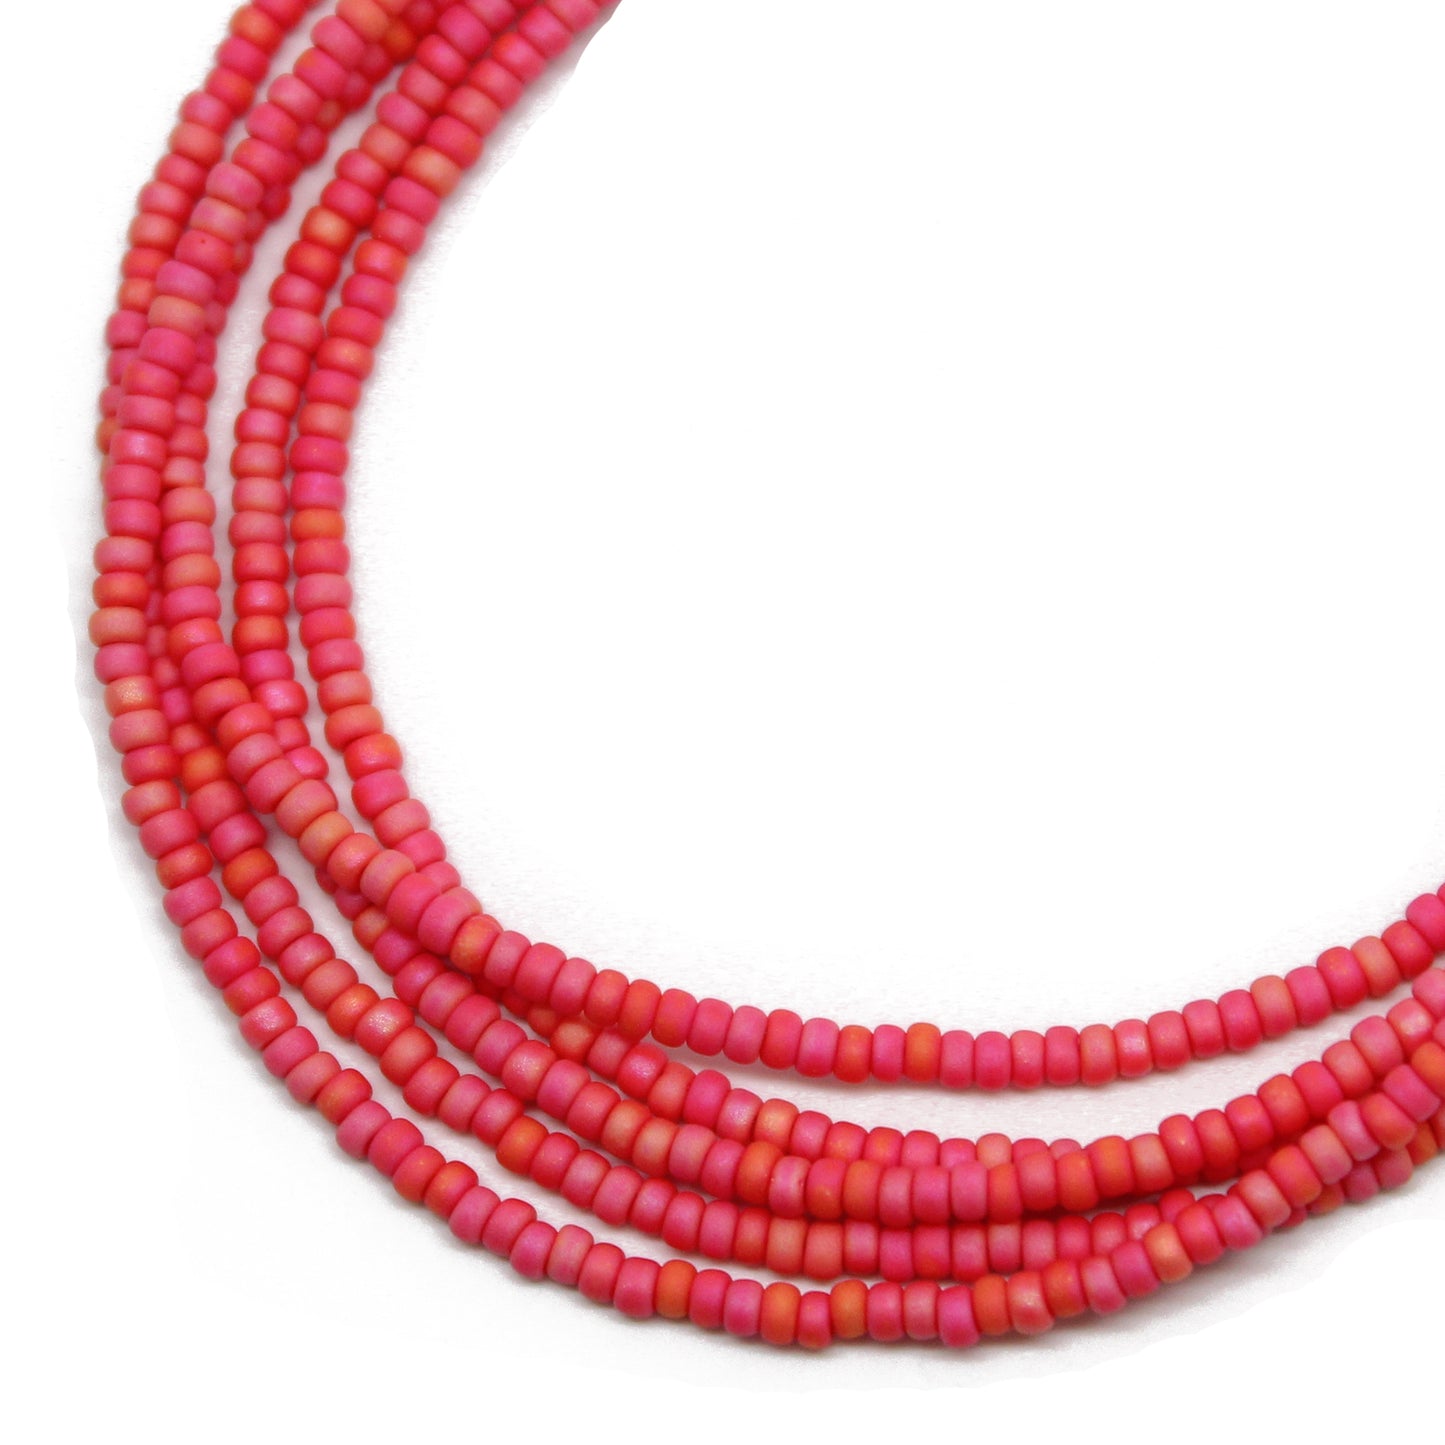 Coral Rainbow Seed Bead Necklace, Thin 1.5mm Single Strand Beaded